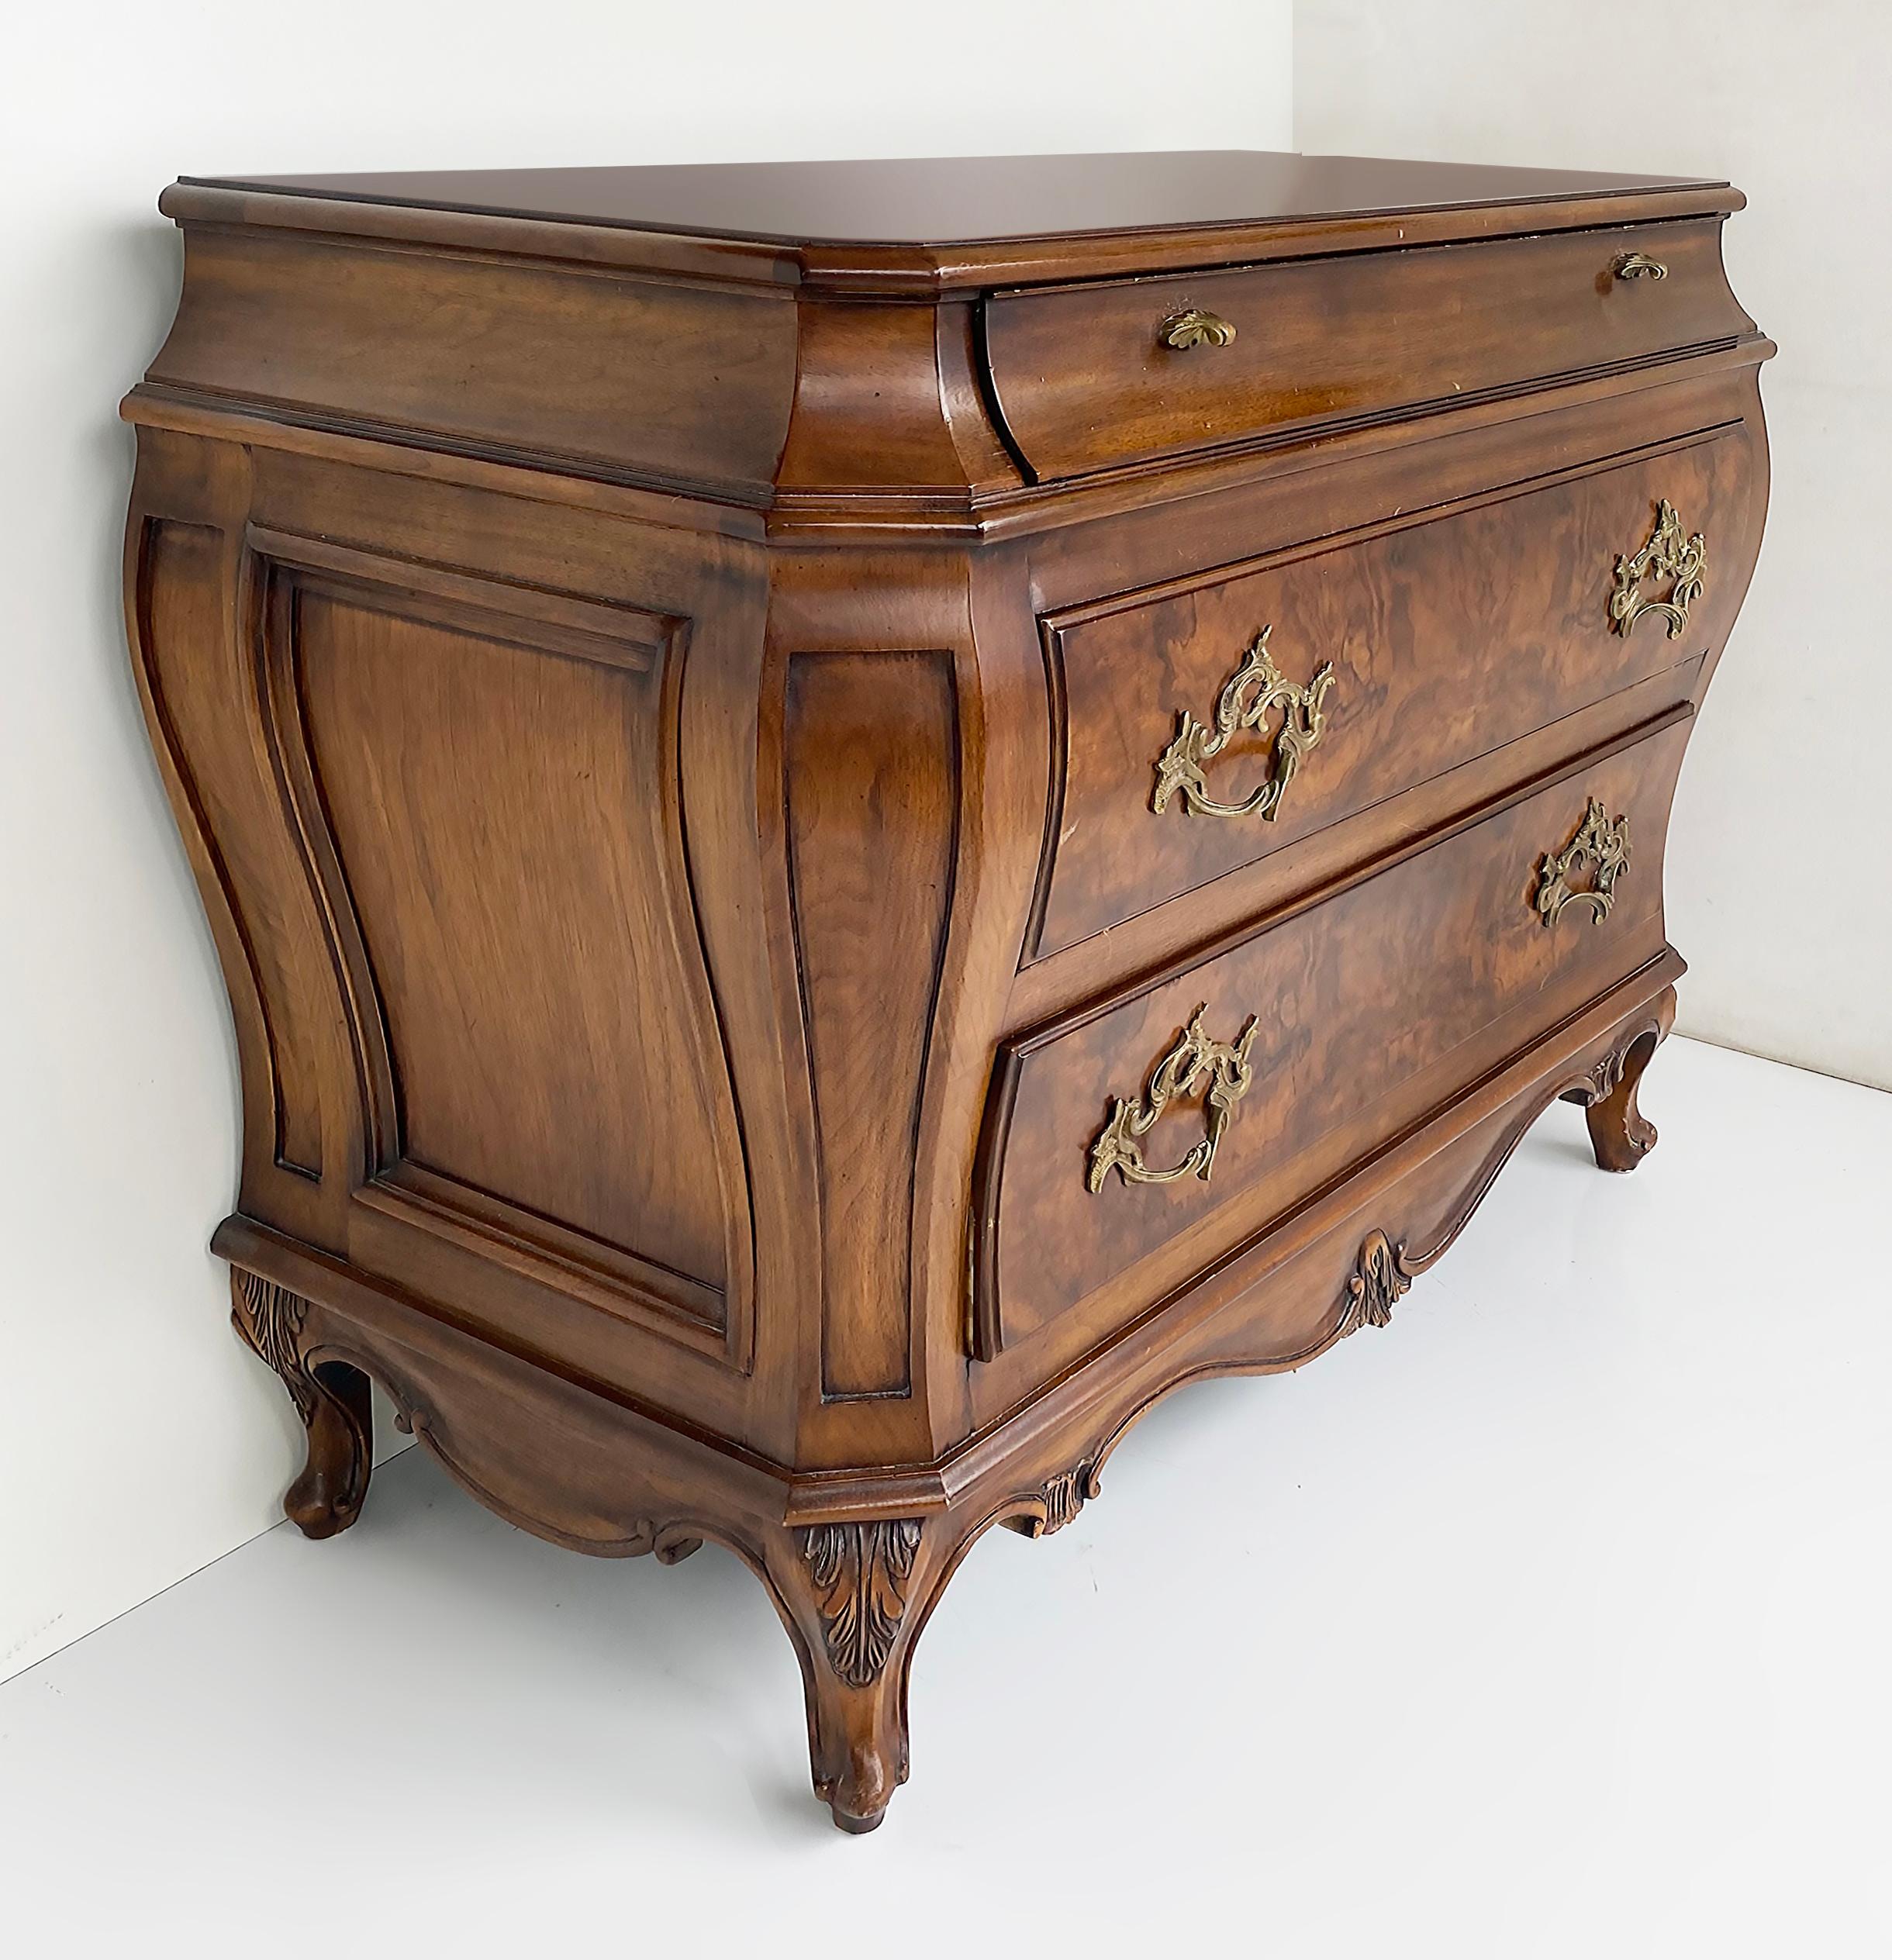 Karges Furniture Louis XVI Bombe 3-Drawer Commode, Burl Walnut

Offered for sale is a late 2oth-century American-made Karges Furniture Company burl and walnut three-drawer chest of drawers commode in the Louis XVI style. The commode has three